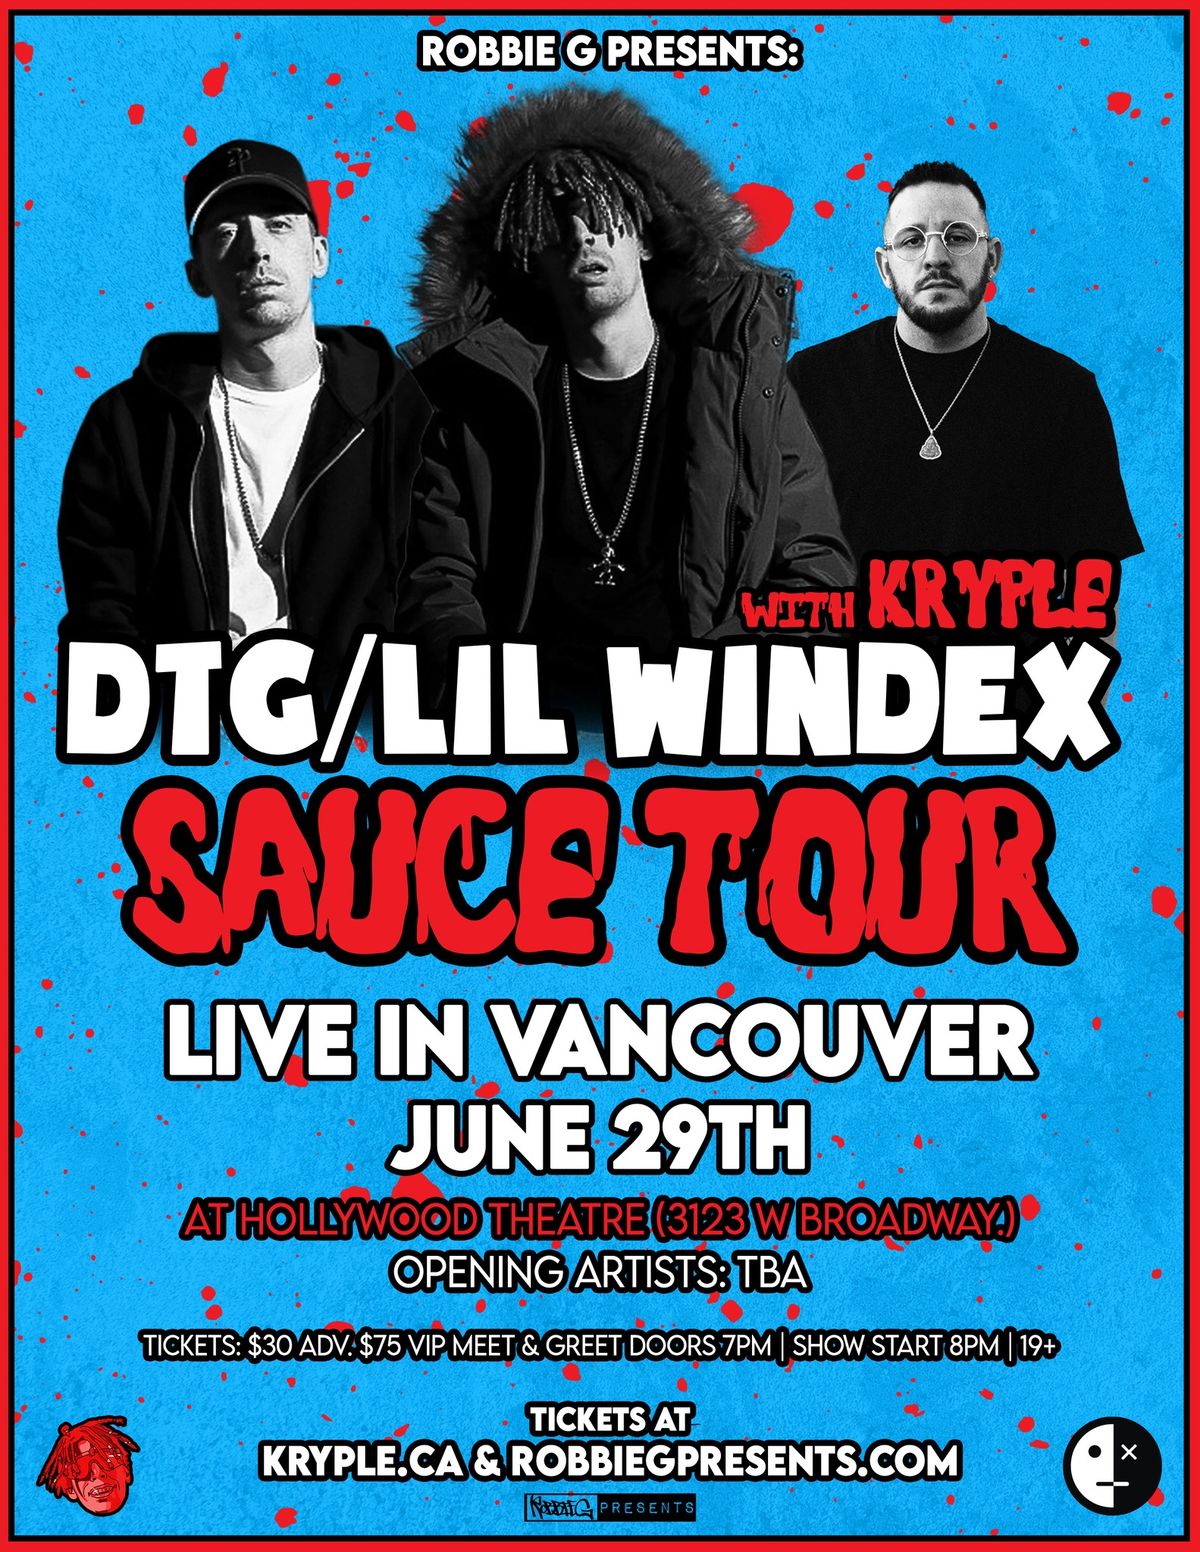 DTG\/Lil Windex Live in Vancouver June 29th at Hollywood Theatre with Kryple